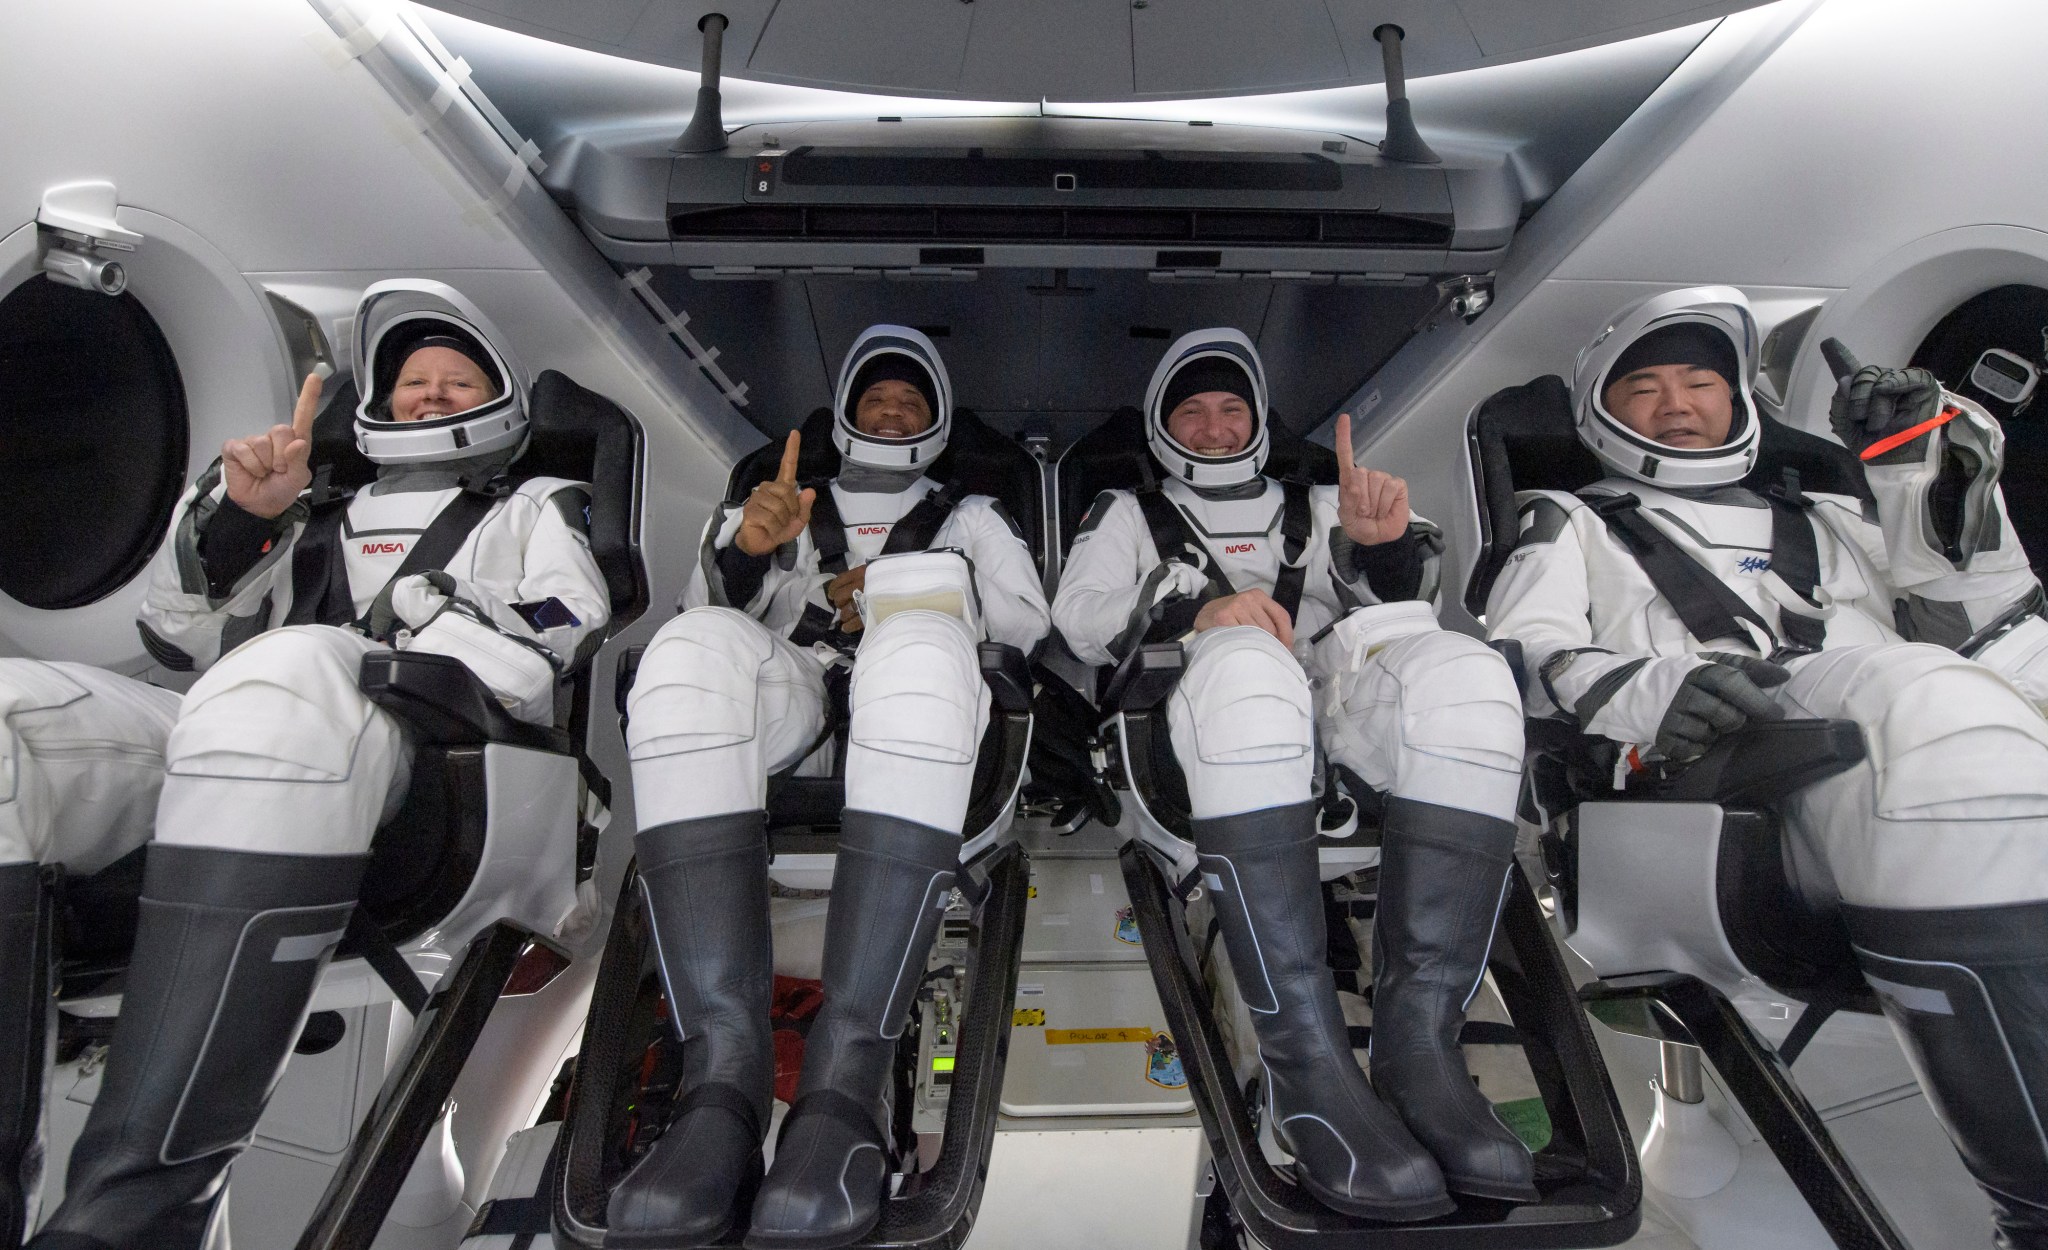 NASA astronauts Shannon Walker, Victor Glover, Mike Hopkins, and Japan Aerospace Exploration Agency (JAXA) astronaut Soichi Noguchi seated in a SpaceX GO Navigator recovery ship.